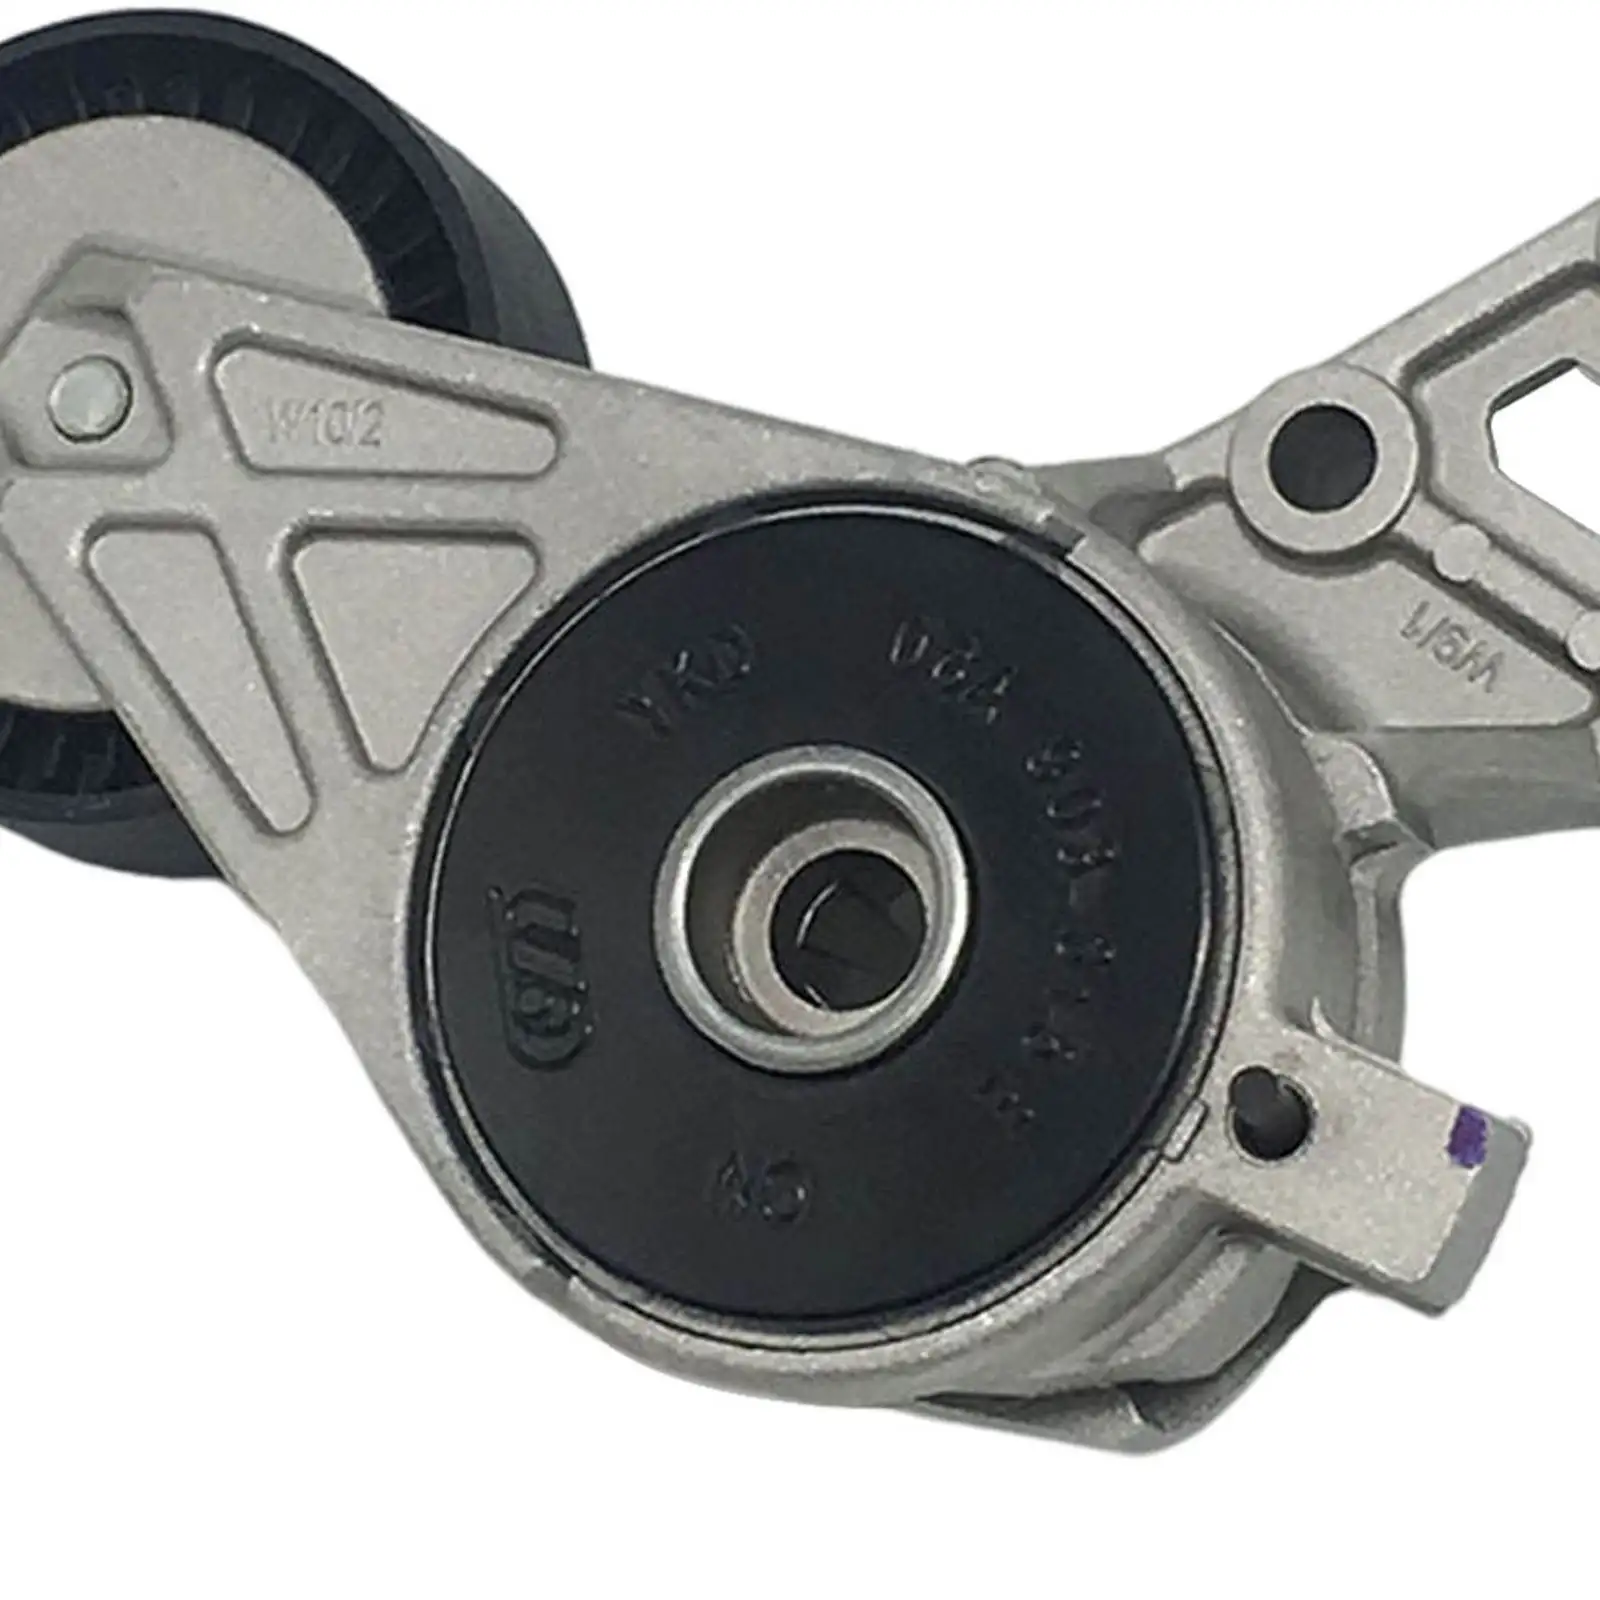 A/C Automatic Belt Tensioner with Pulley for VW Golf Car Parts Replace